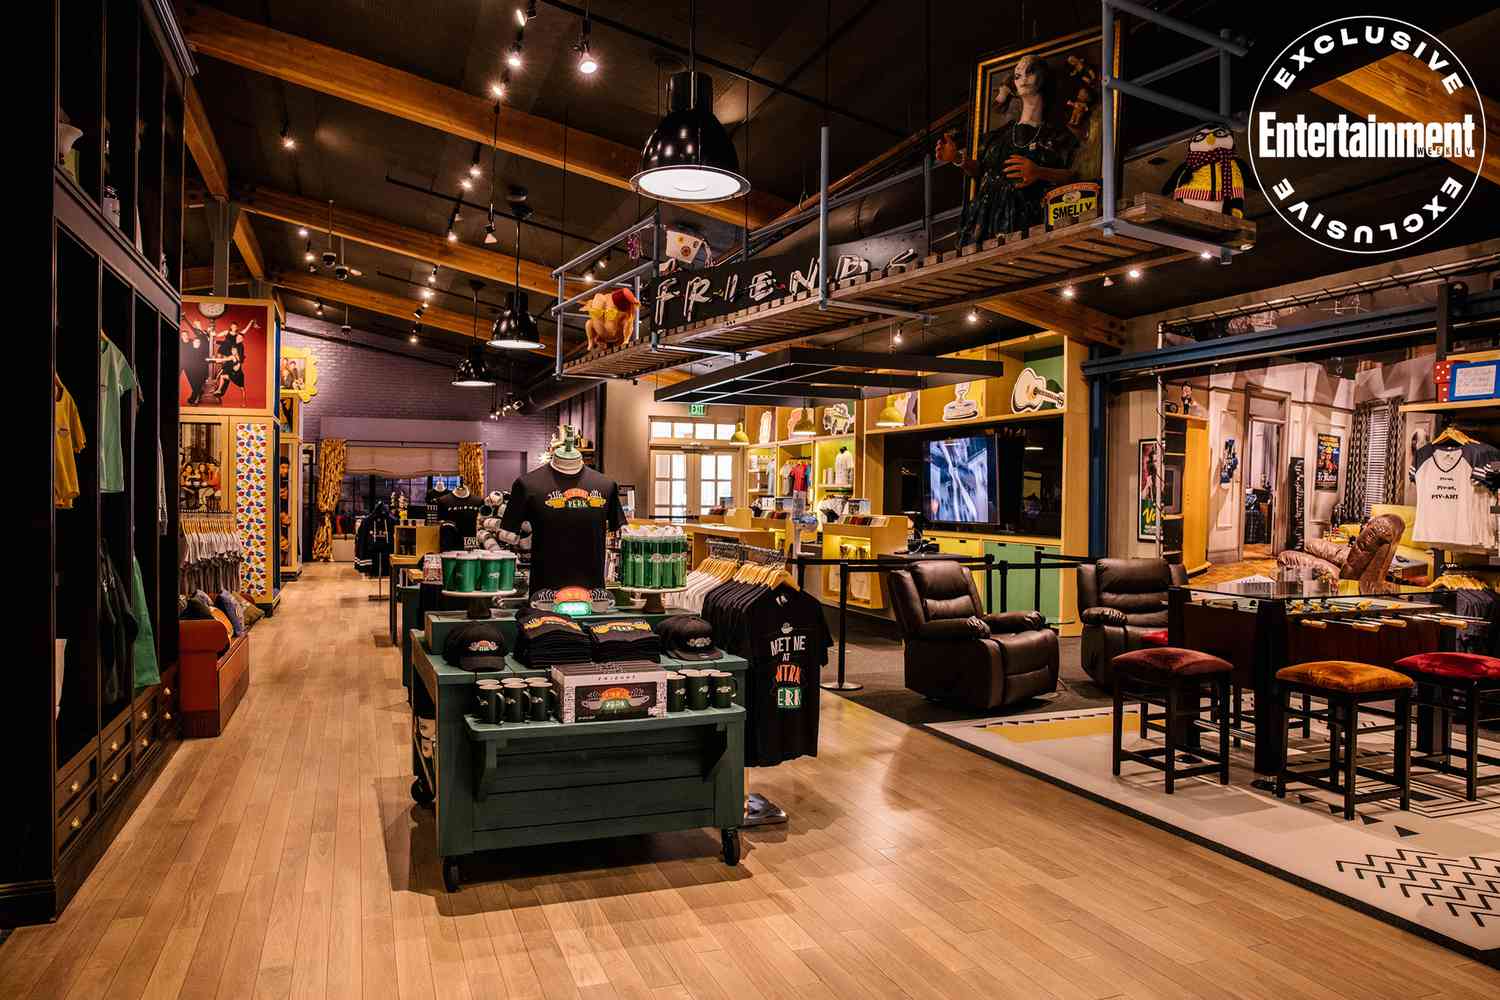 Warner Bros. tour expands Central Perk from Friends